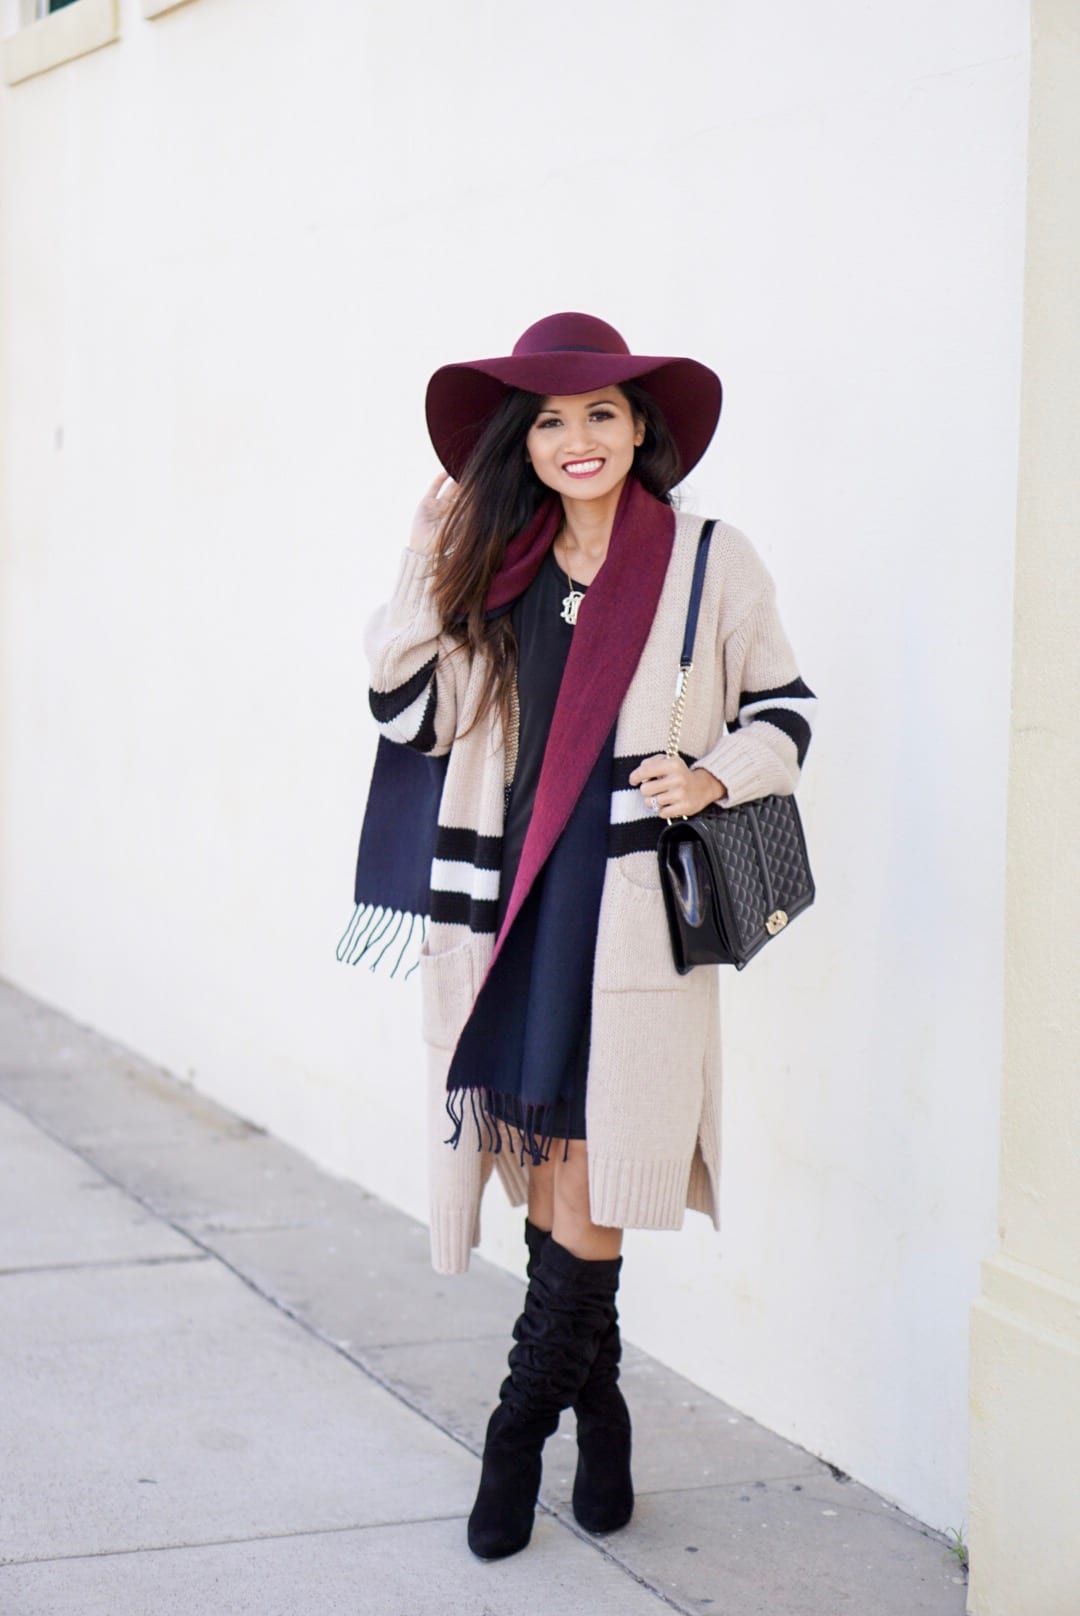 november favorites, fall accessories, Burgundy hat, floppy hat, fall accessories, beauty favorites, fashion favorites, slouchy boot, black boots, striped cardigan, goodnight macaroon, Rebecca minkoff love cross body, monogrammed necklace , black dress, fall dress, fall outfit, fall favorites 